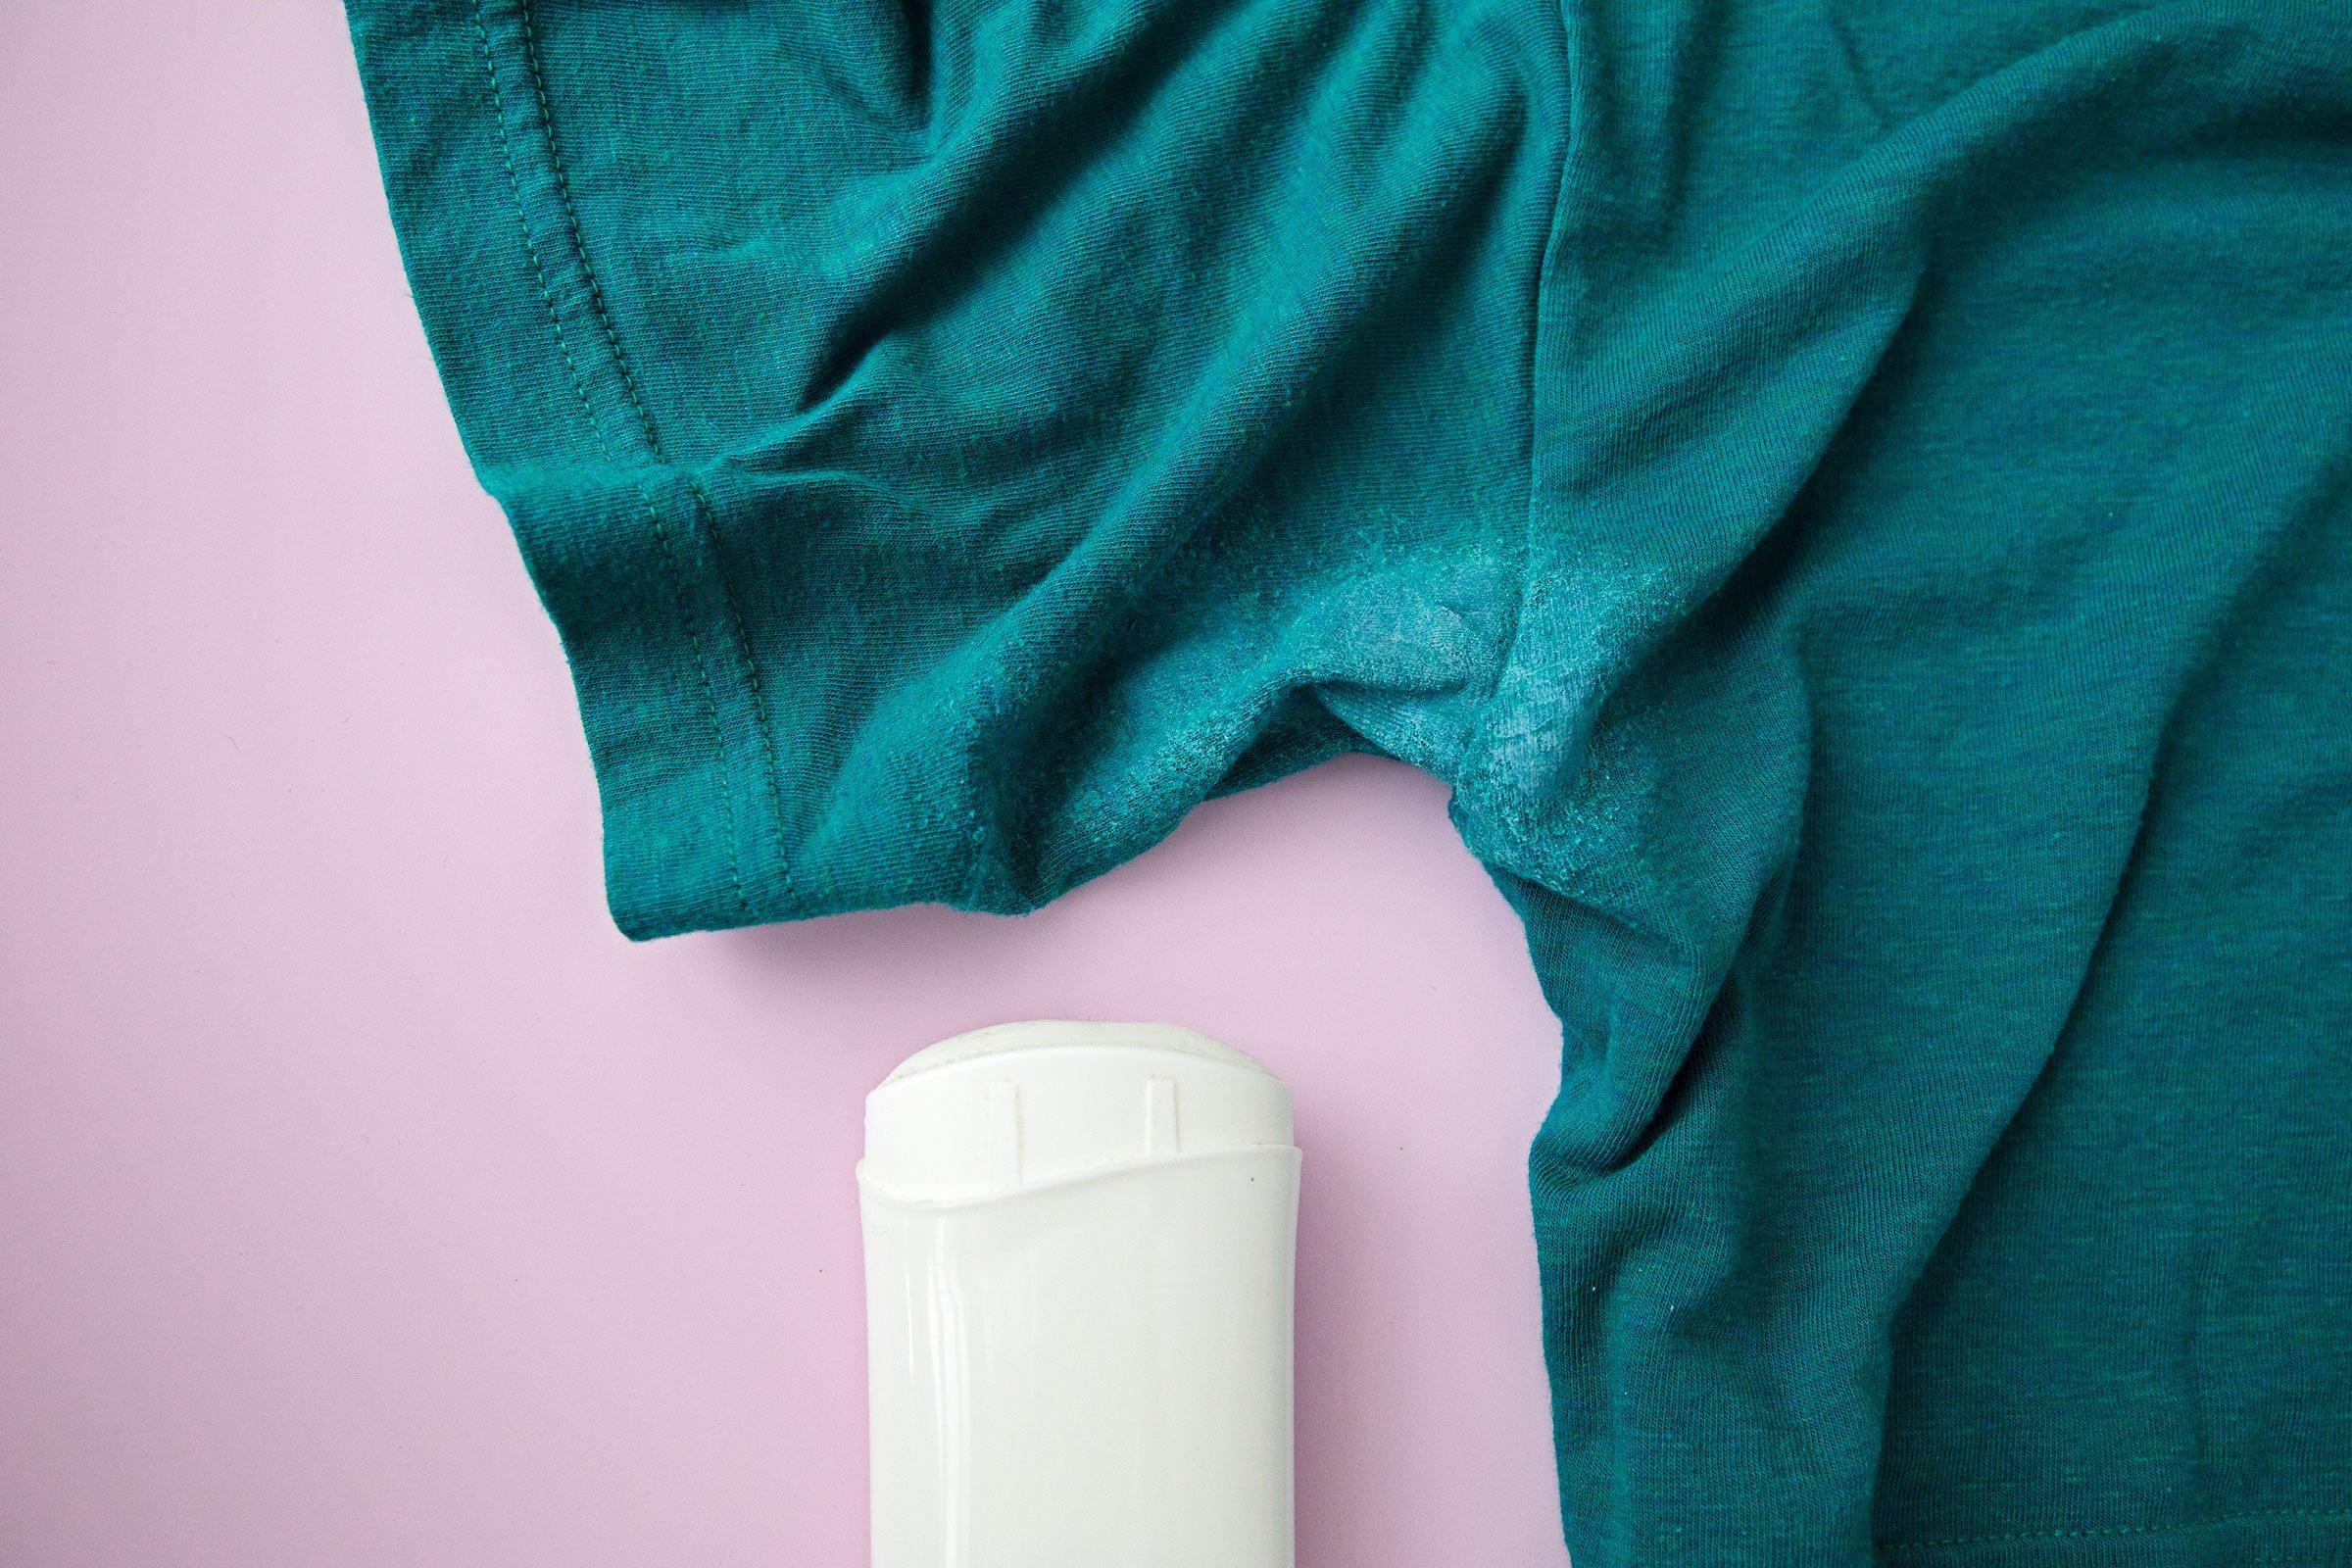 sticker Eenvoud Licht How to Get Deodorant Stains Out of Shirts — Remove Deodorant Residue